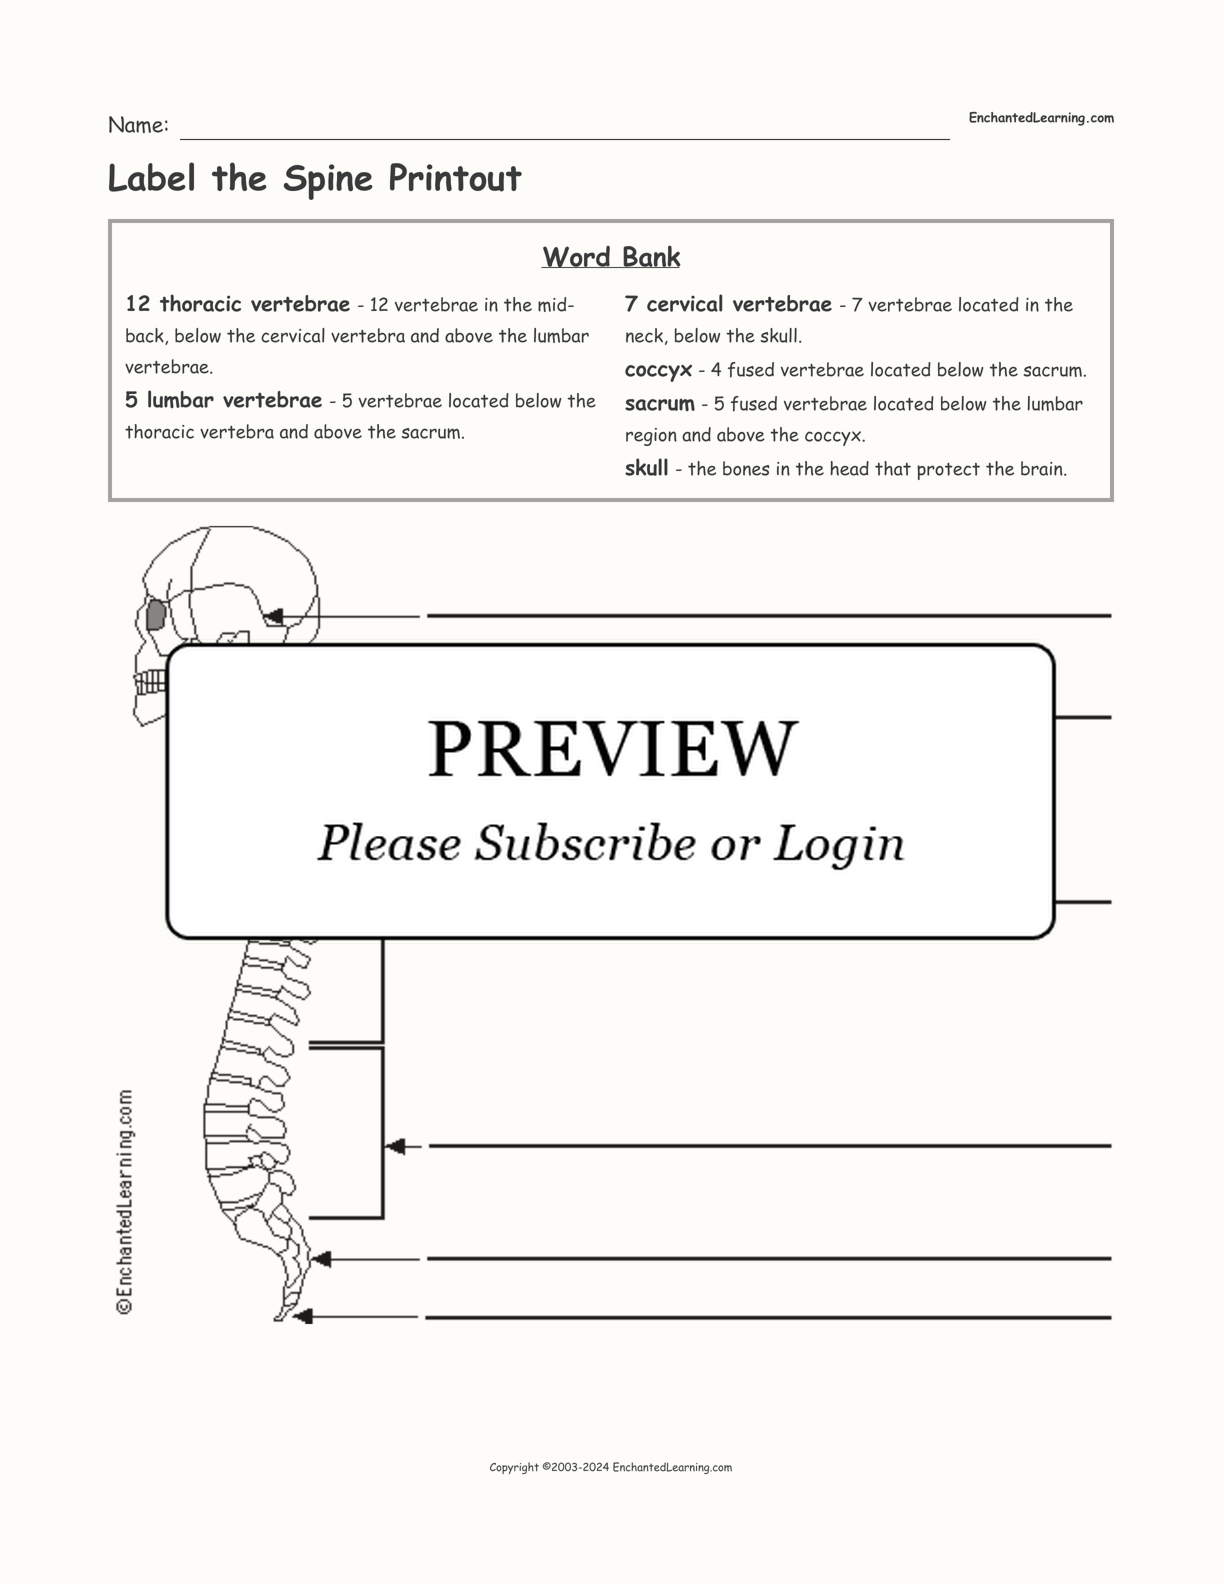 Label the Spine Printout interactive worksheet page 1